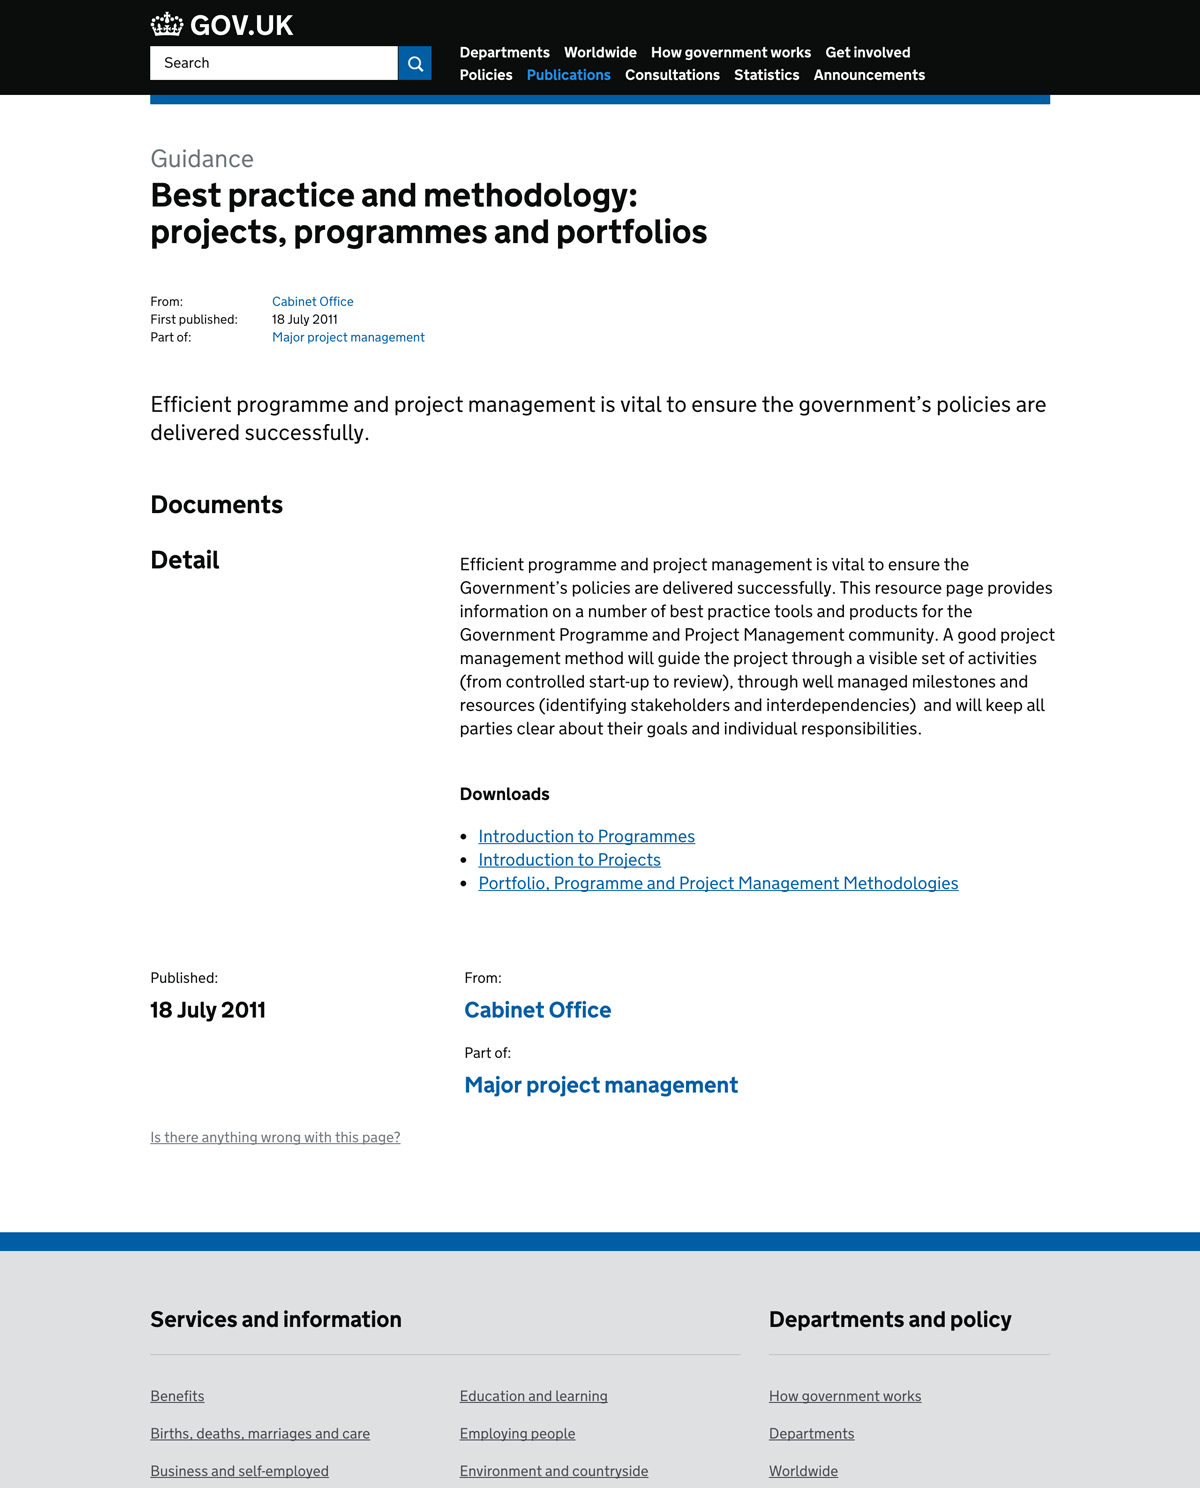 Best practice and methodology: projects, programmes and portfolios